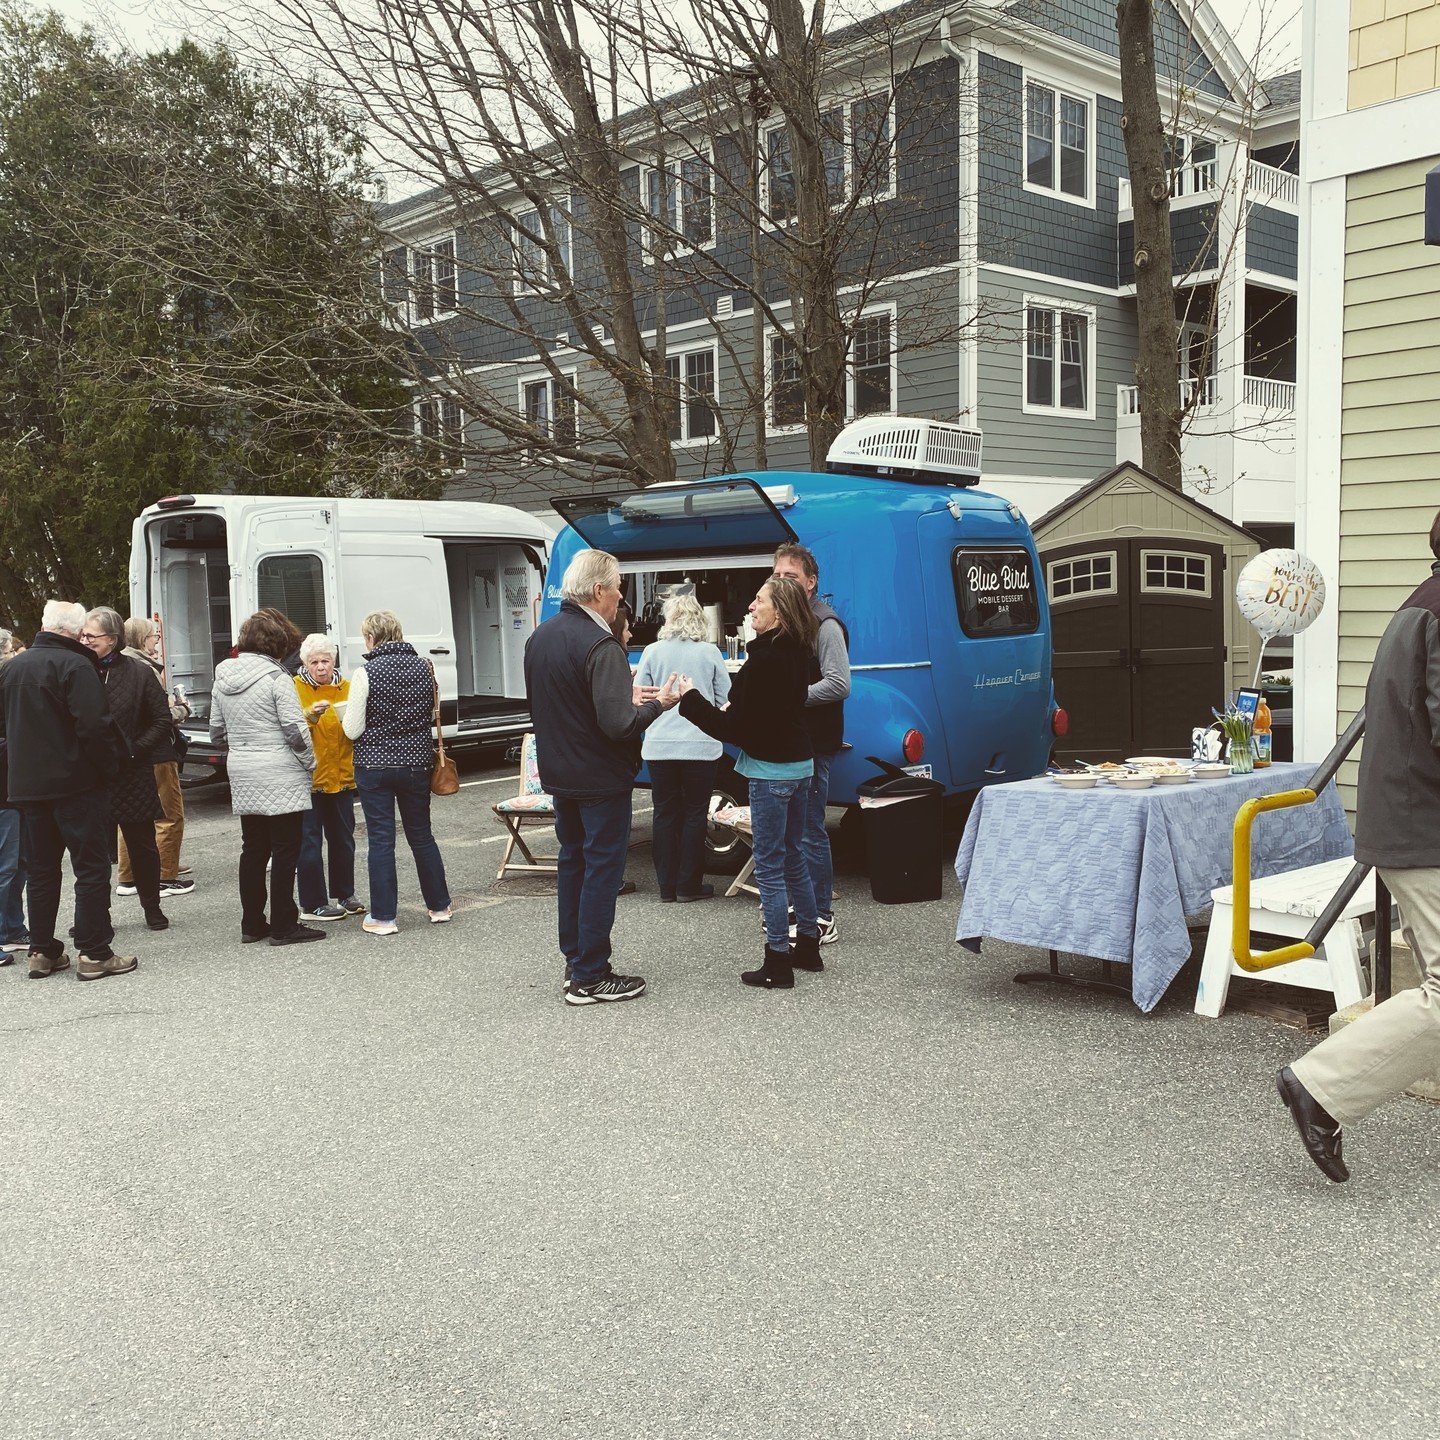 April is Volunteer Appreciation Month! We appreciate our volunteers EVERY DAY, but thought it would be nice to celebrate them with a special afternoon of coffee &amp; desserts with the @bluebirdmobiledessertbar Root Beer floats, affogato, and delicio